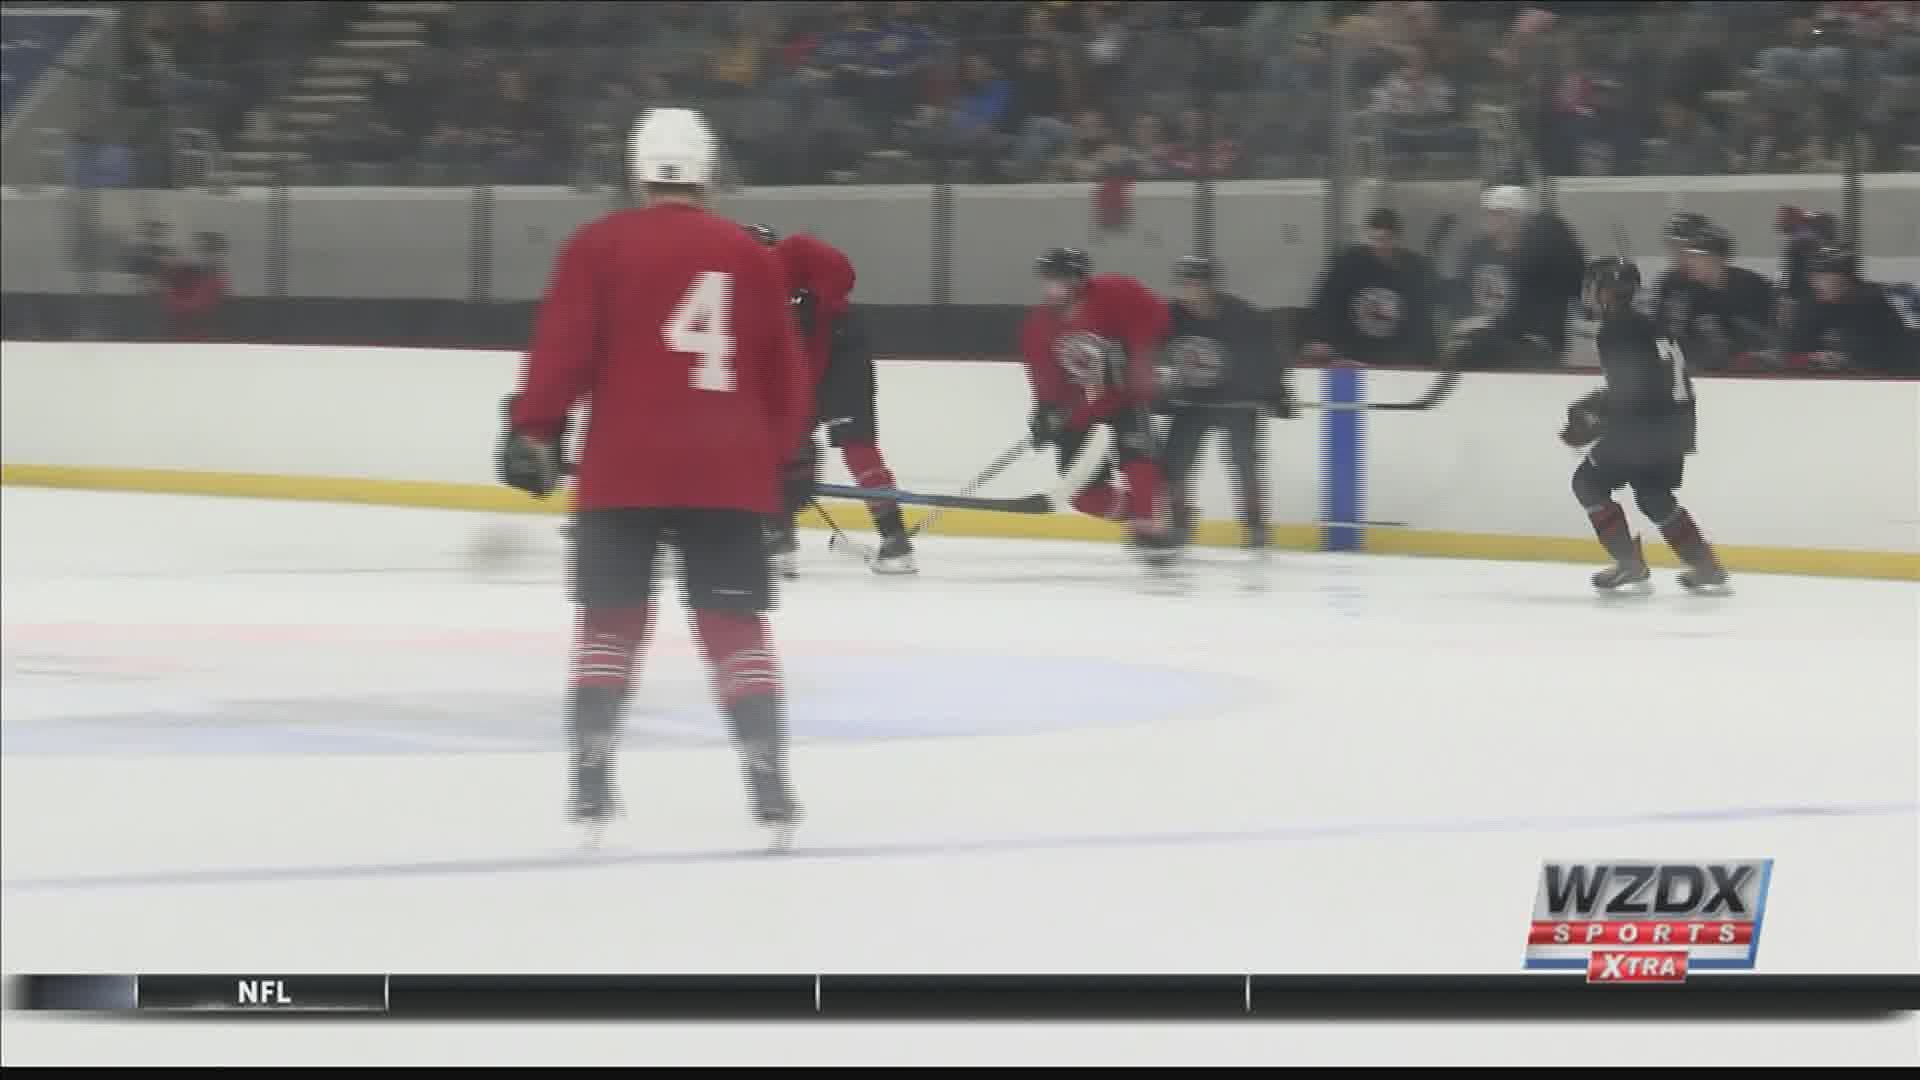 This weekend, the Huntsville Havoc were back in action at the Von Braun Center. The former SPHL Champions held their final free agent scrimmage for fans to enjoy.